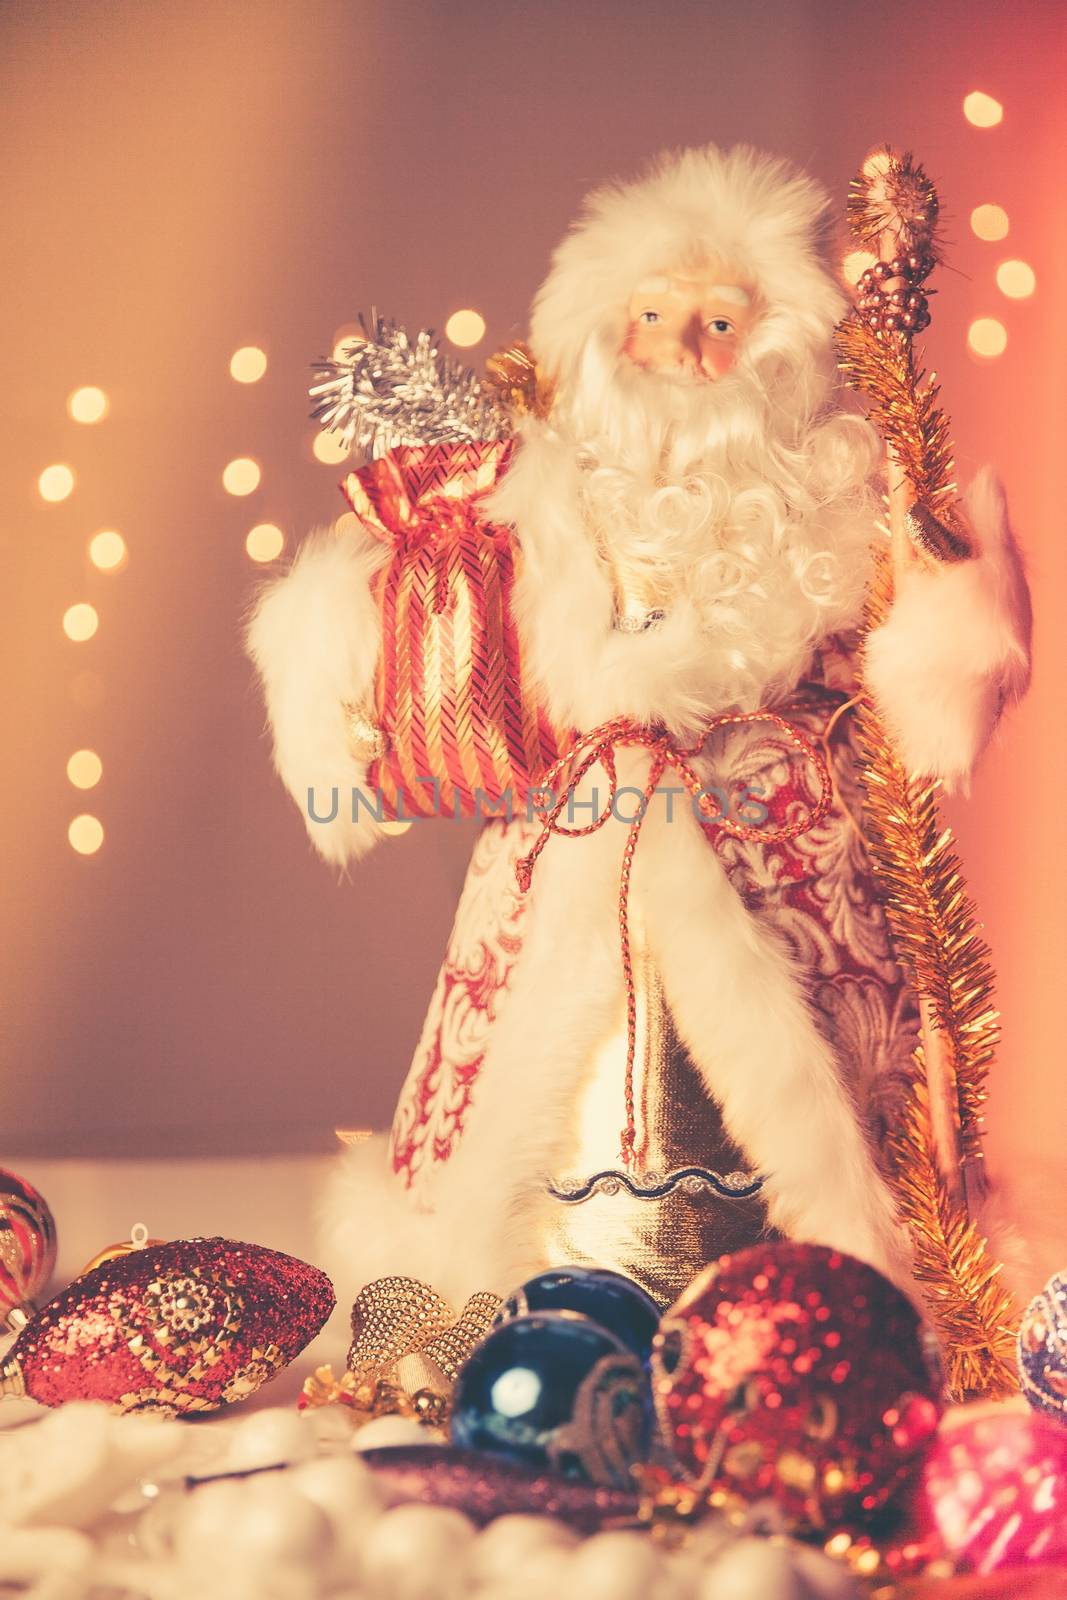 Father Frost (Russian Ded Moroz) figurine on traditional 2019 by mi_viri